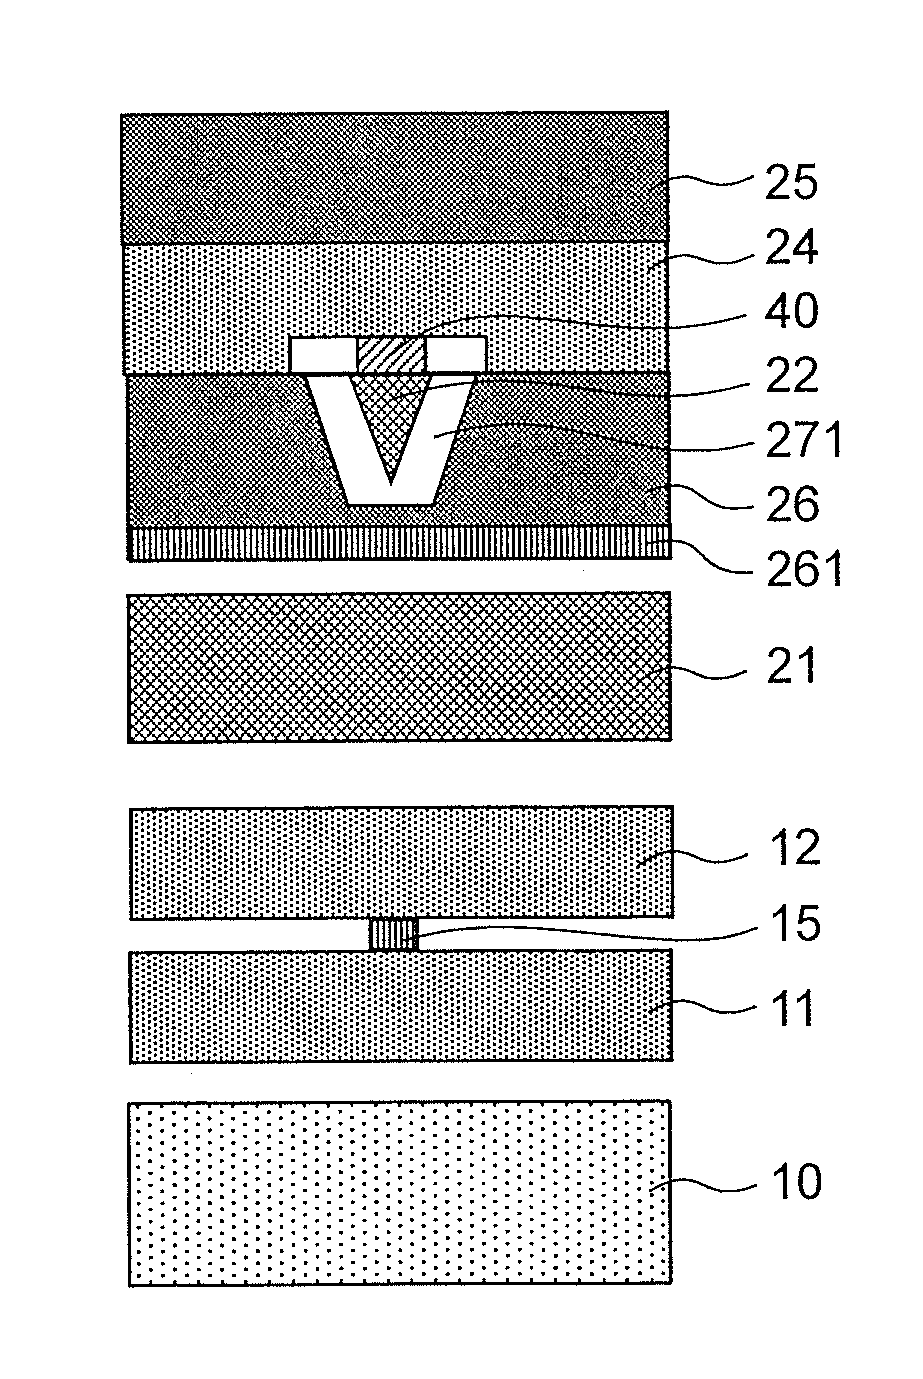 Microwave assisted magnetic recording head and magnetic data storage apparatus